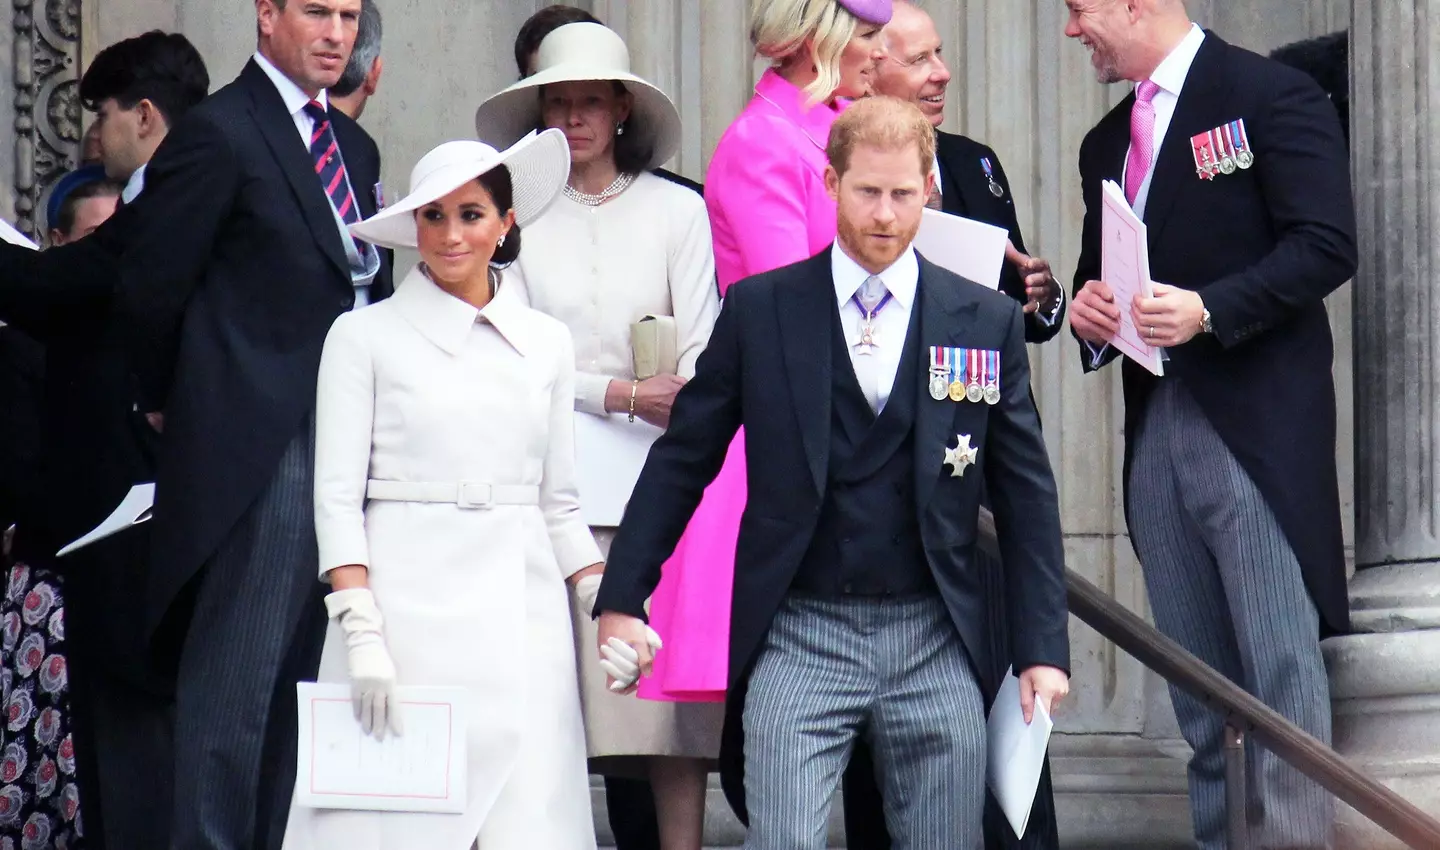 Both Harry and Meghan visited the UK earlier in the summer to mark the Queen's Platinum Jubilee celebrations.